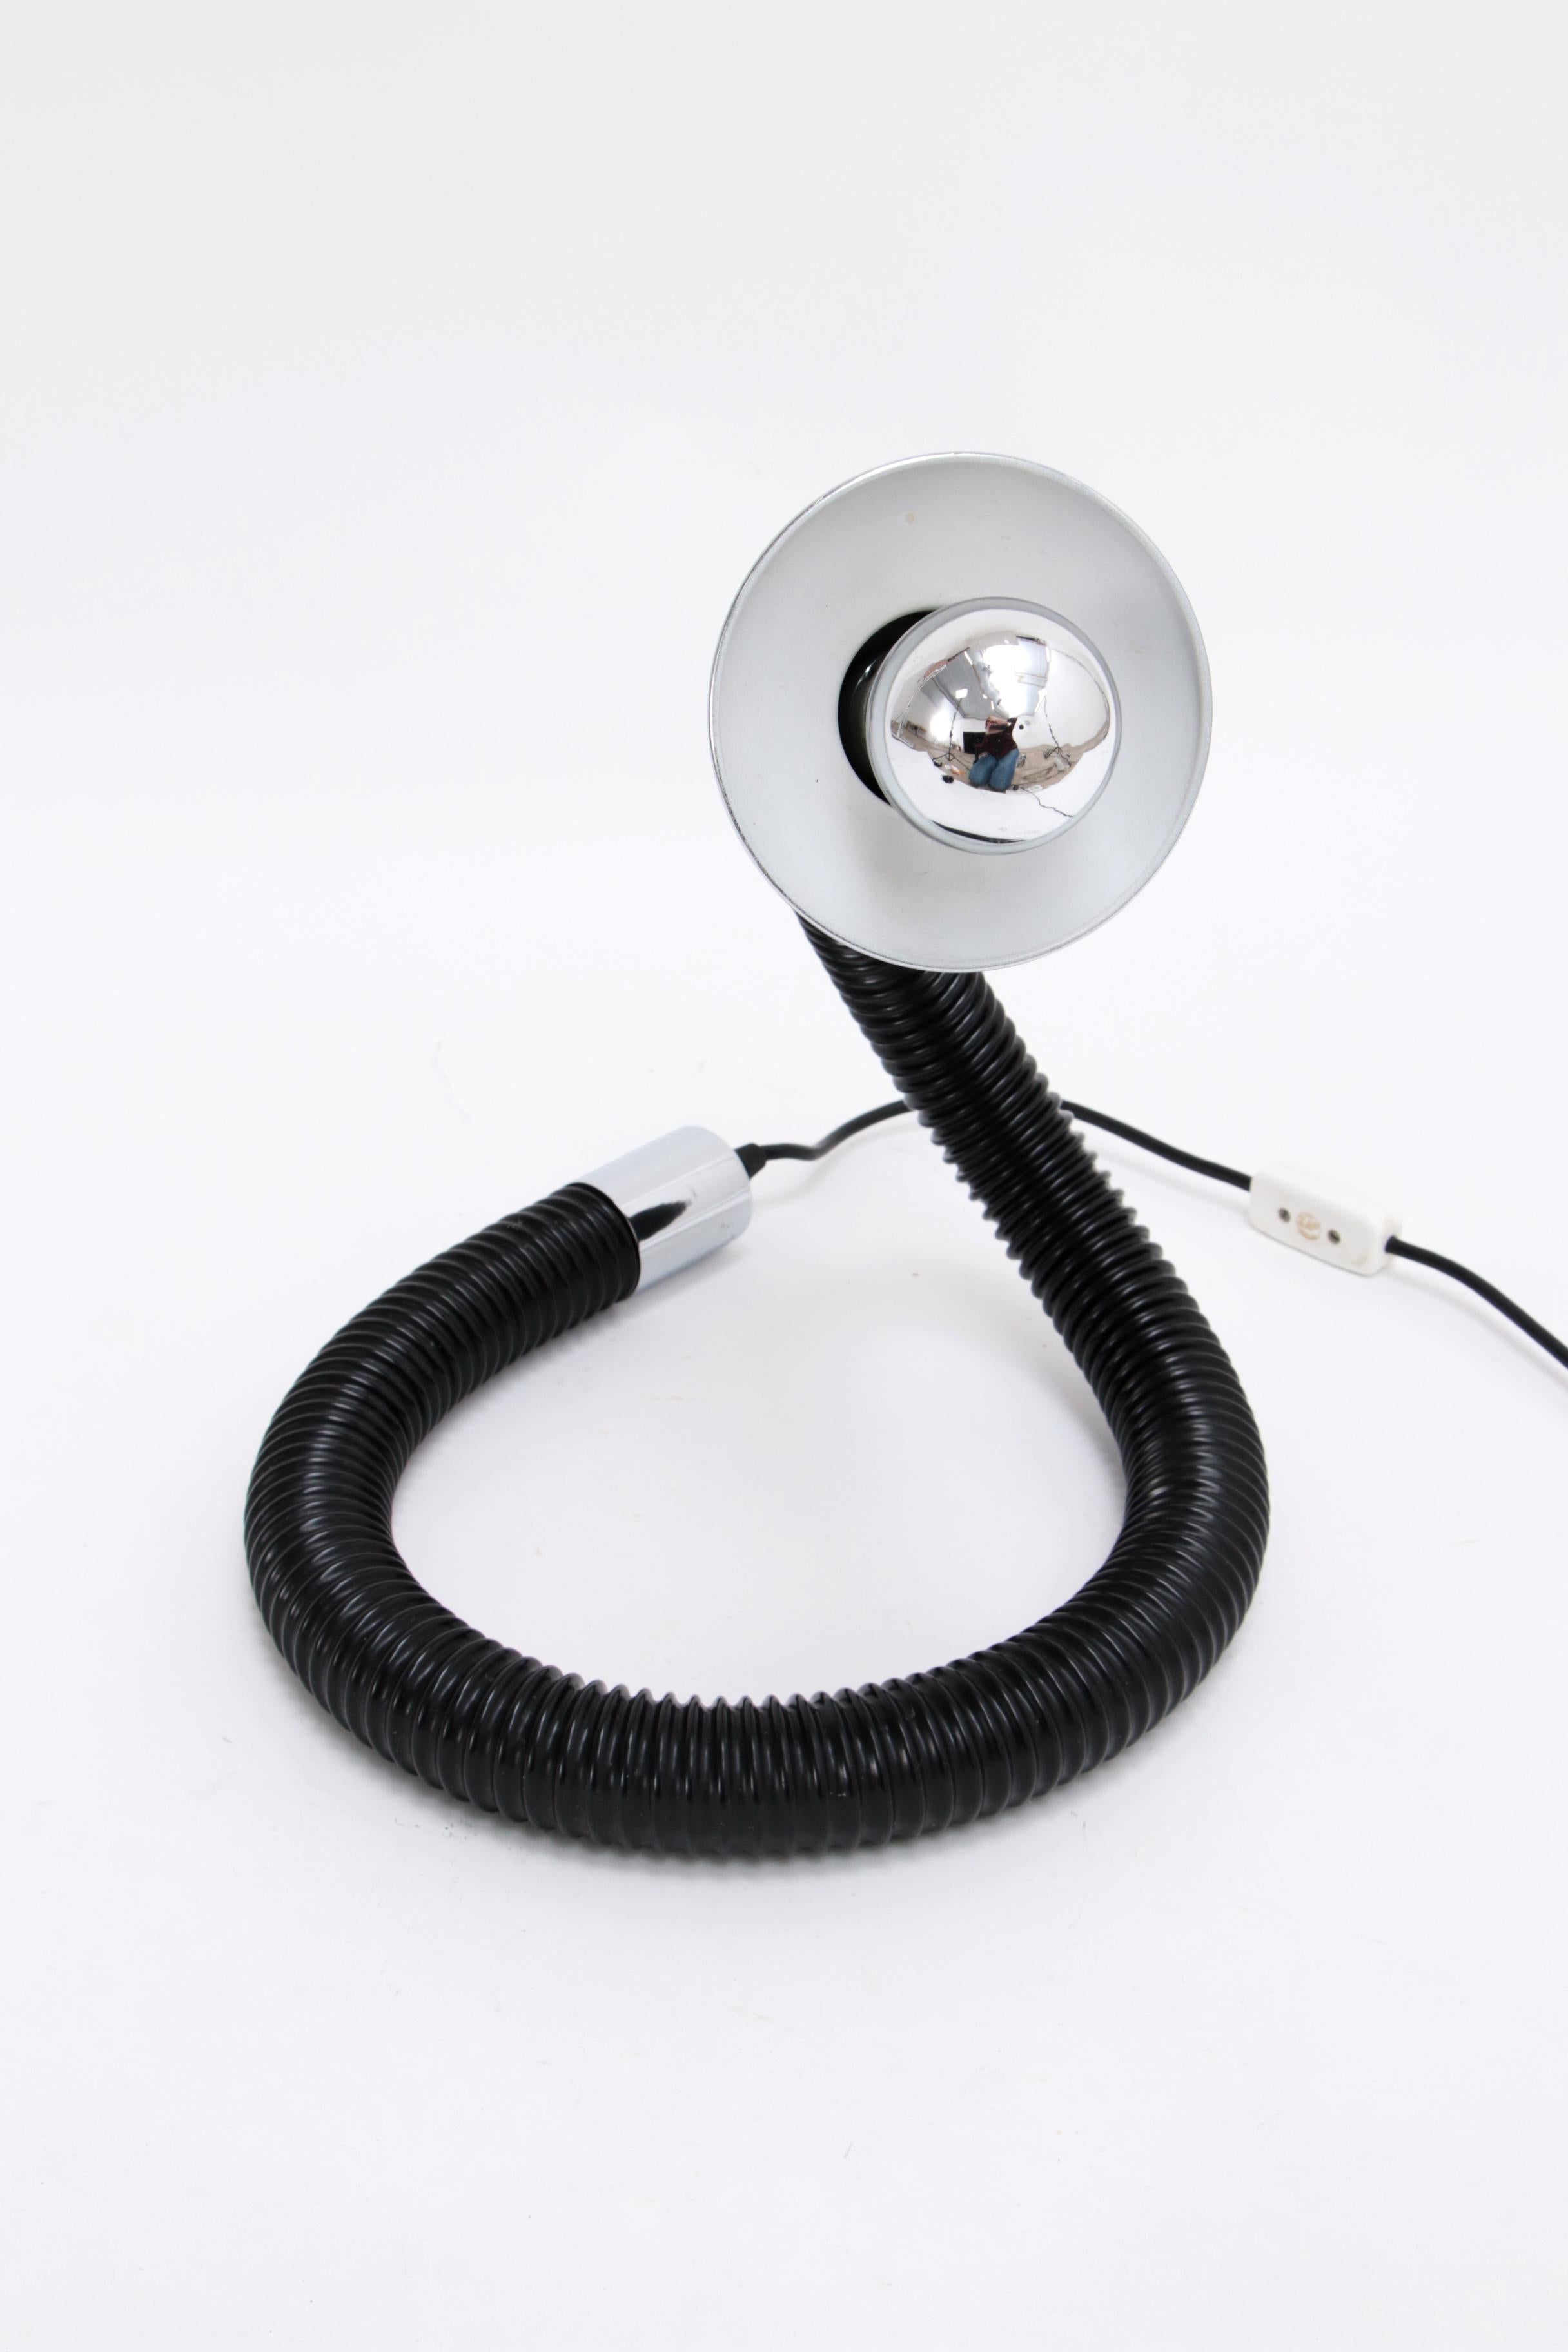 Hillebrand Desk lamp Model Snake with beautiful chrome shade, 1970
 
Can rotate in various positions and turns.

Very flexible hose with a nice chrome cap at the end, also nice if you put a silver head mirror light in it. 
If you are looking for a